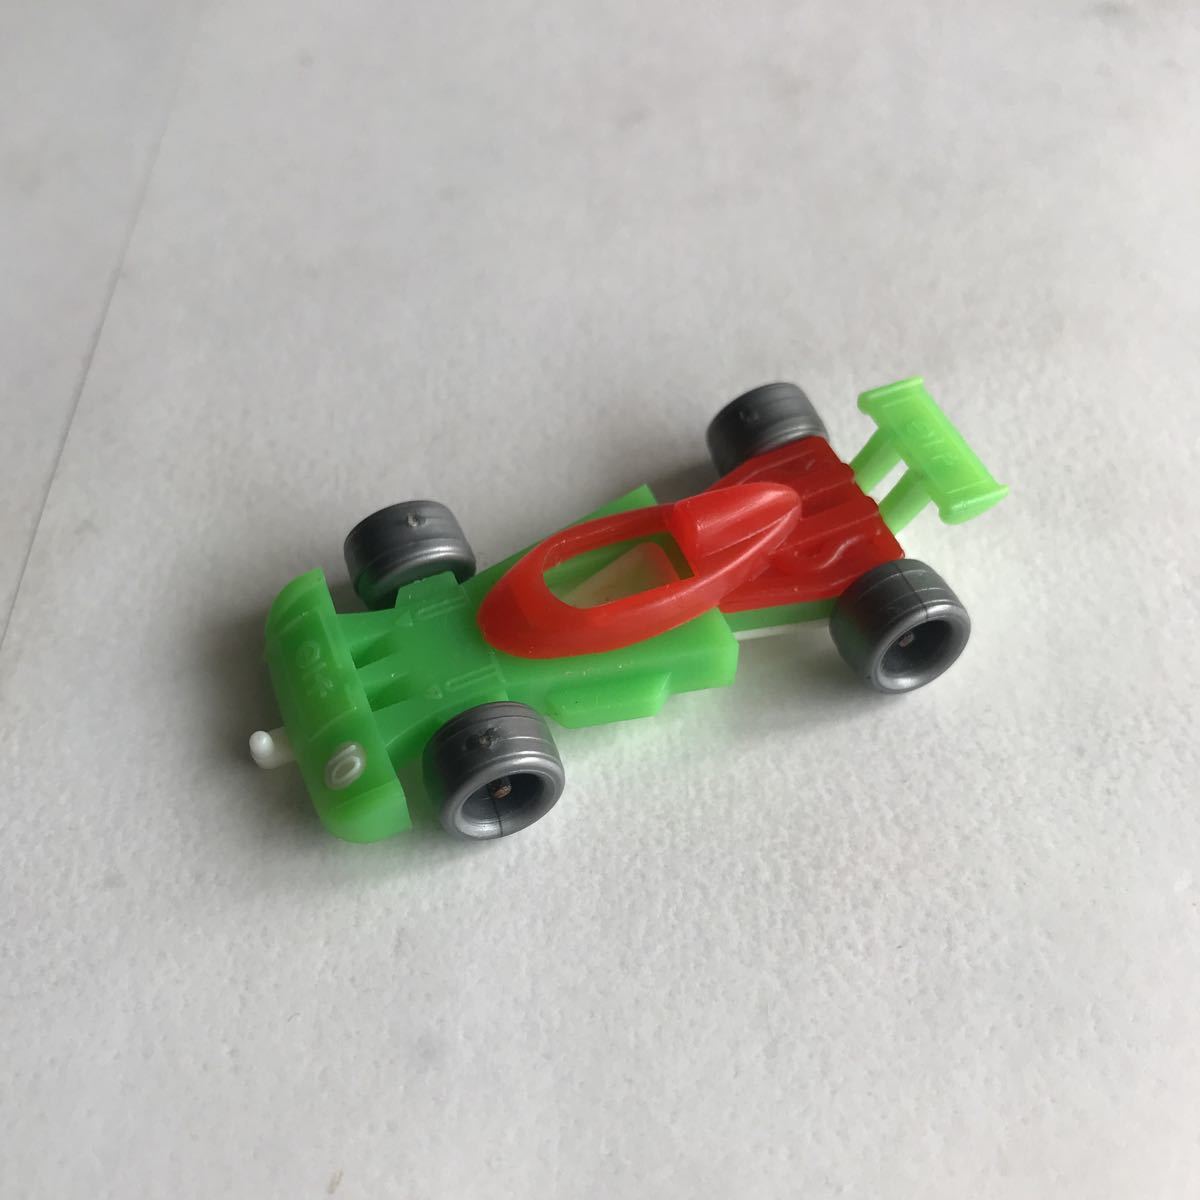 # Showa Retro Glyco extra F1 racing car minicar alf that time thing # inspection ) extra Shokugan eraser former times Glyco old at that time forest . toy toy 